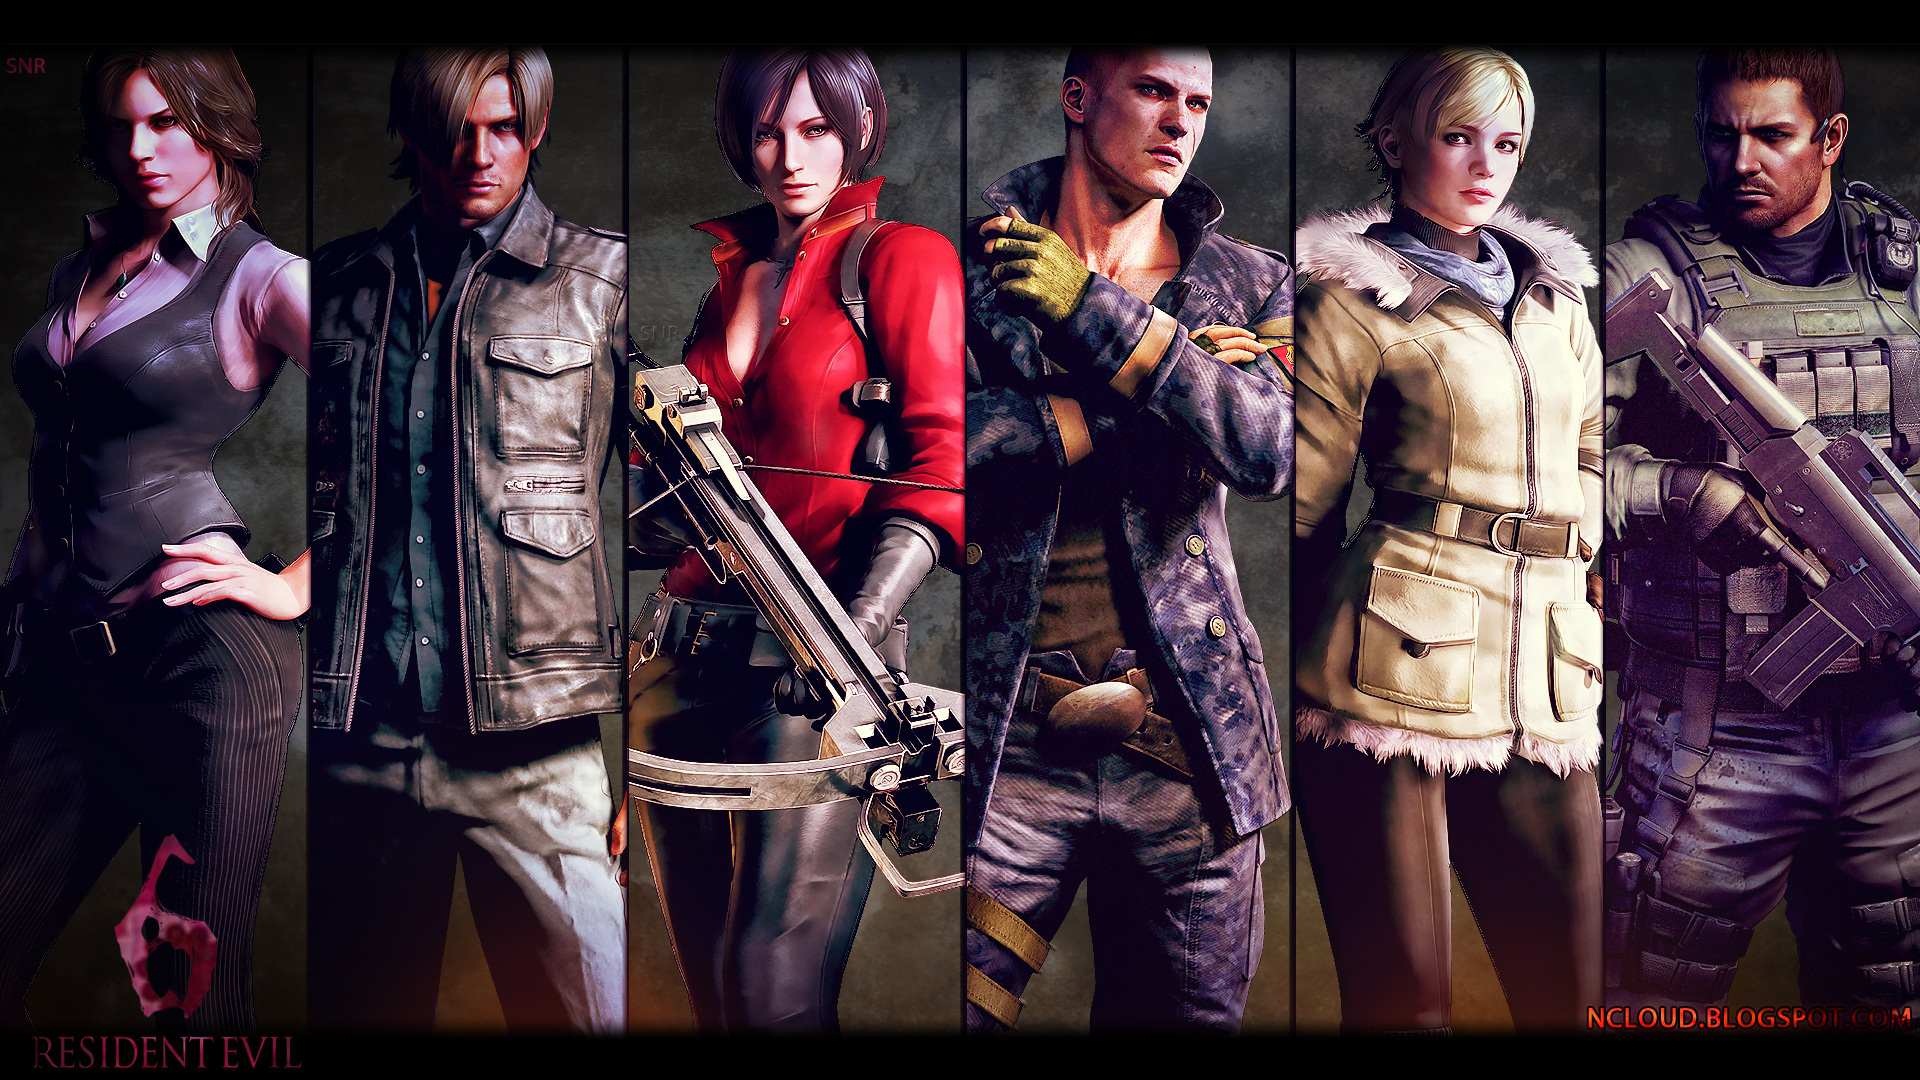 Resident Evil 6 HD game wallpapers #11 - 1920x1080